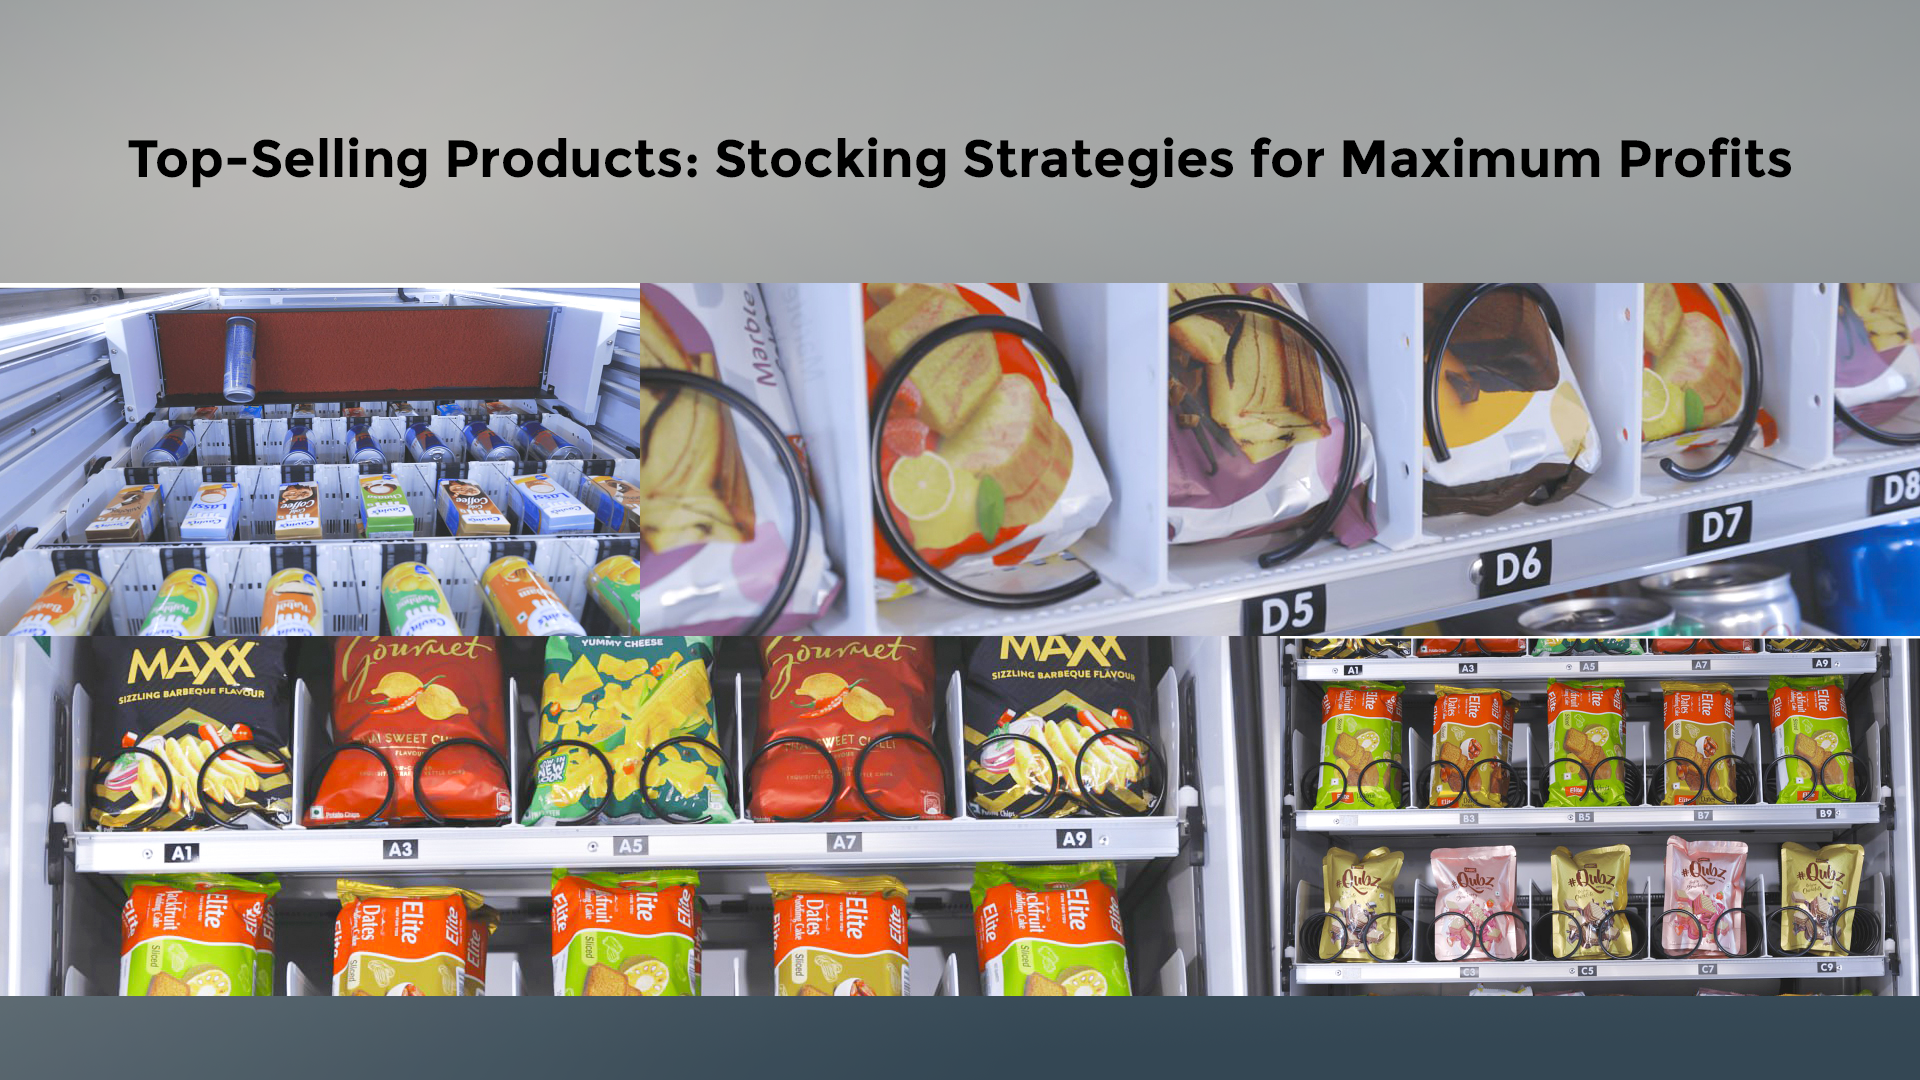 Top-Selling Products: Stocking Strategies for Maximum Profits